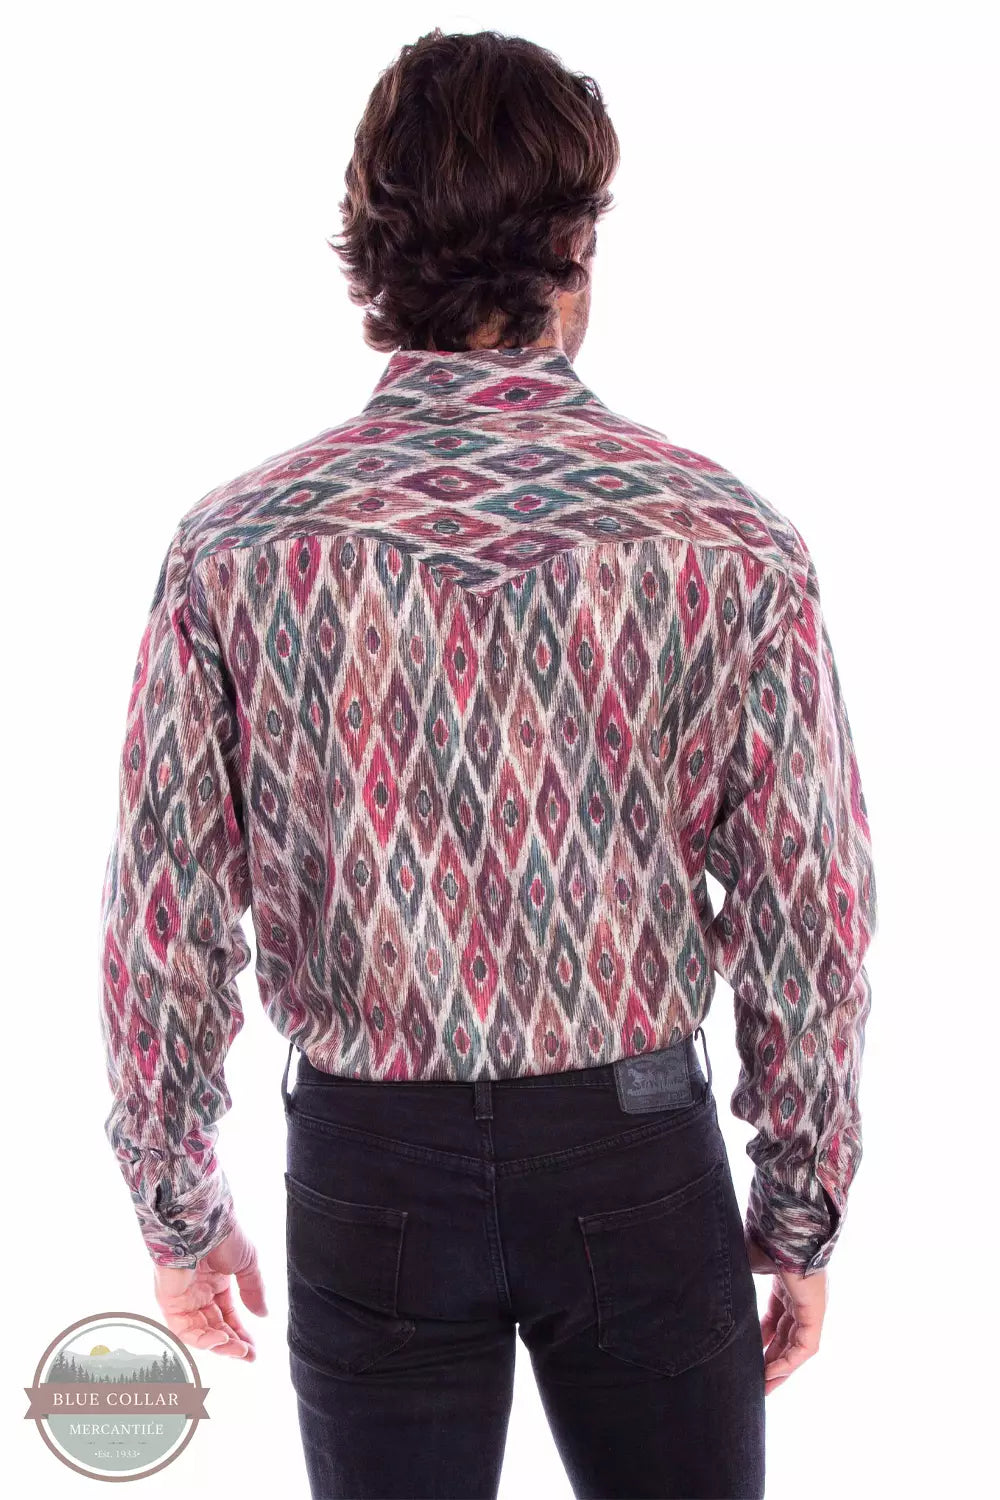 Scully PS-330 MUL Diamond Print Tencel Long Sleeve Shirt in Multi Back View